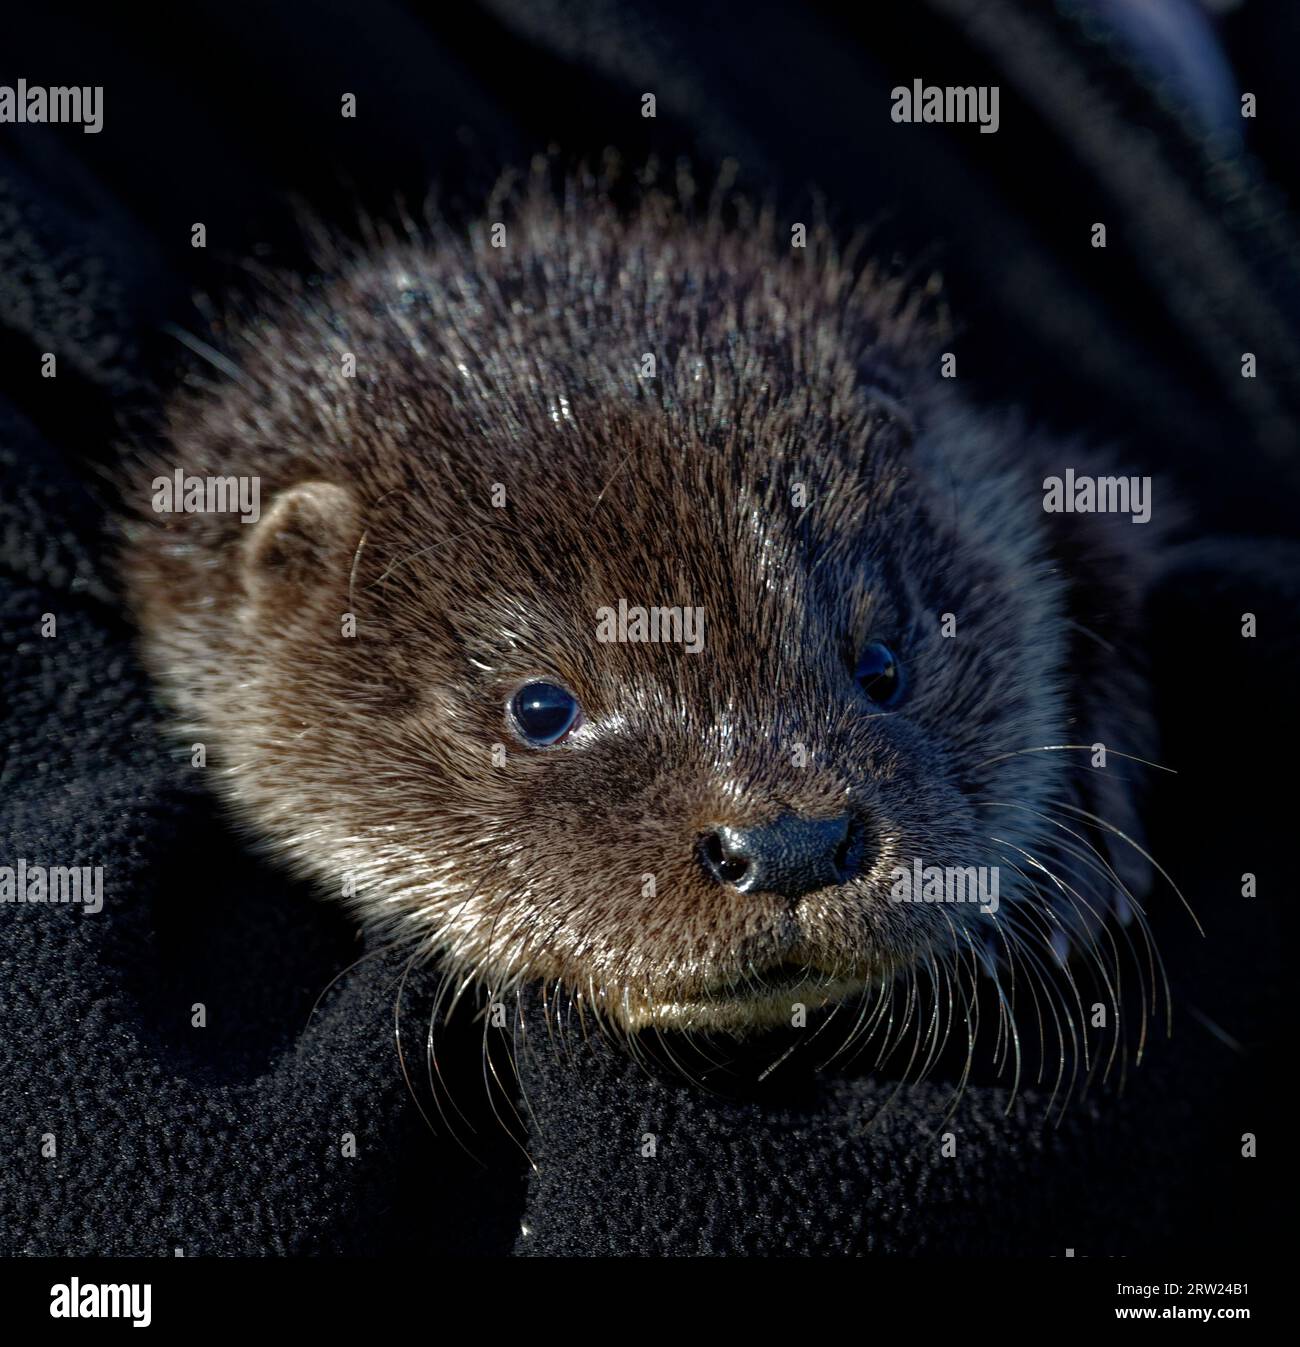 Eurasian Otter (Lutra lutra) 6 week old cub in care being held. Stock Photo